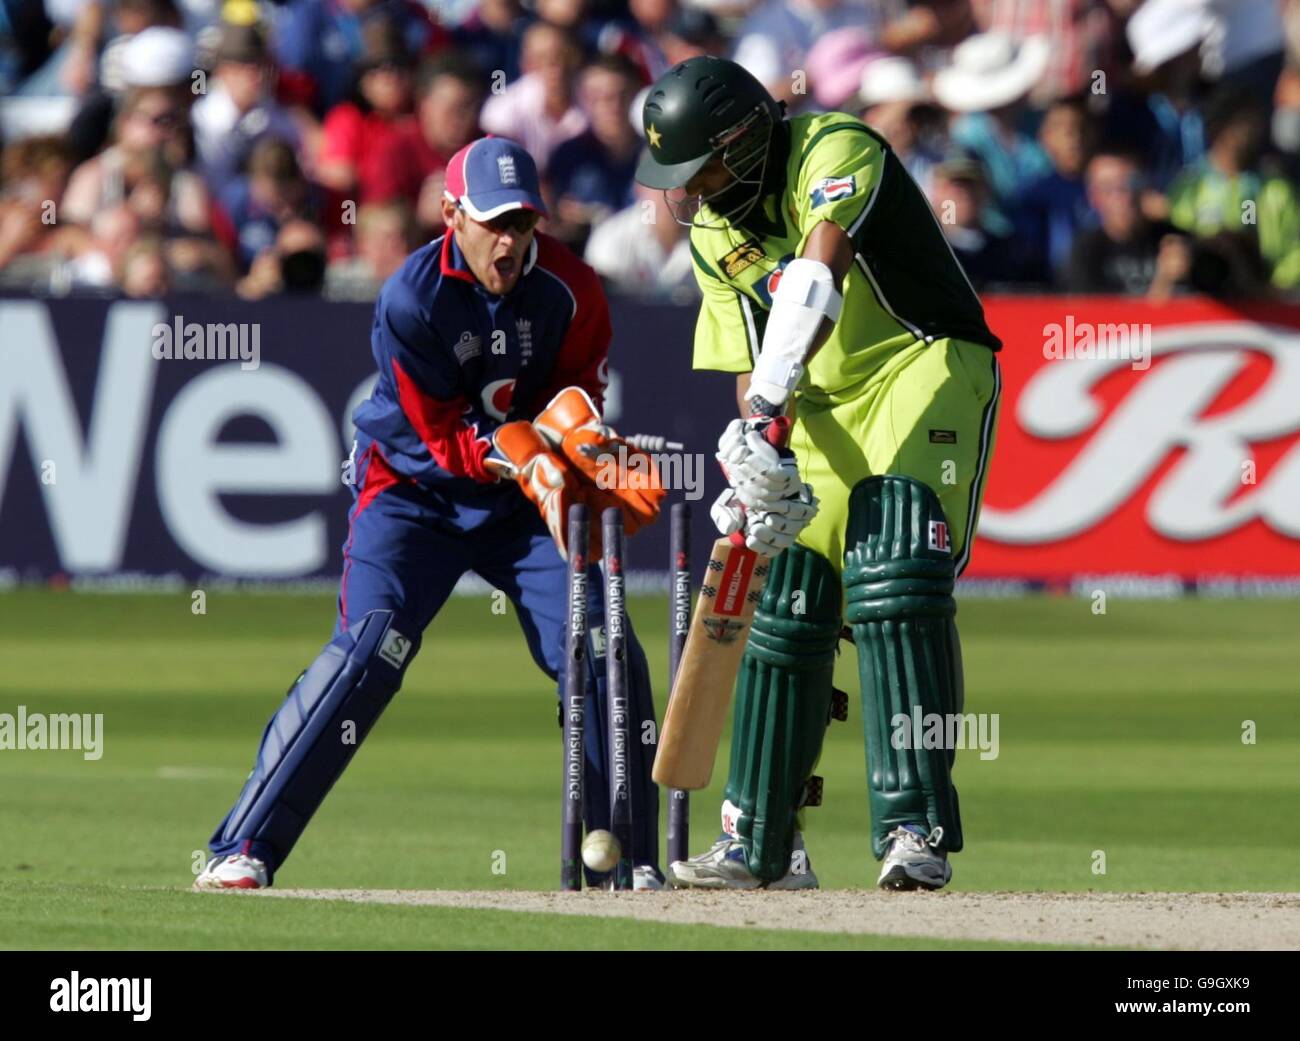 Pakistan's Mohammad Yousuf chops the ball onto his stumps against England during the 4th NatWest Series One-Day International at Trent Bridge, Nottingham. Stock Photo